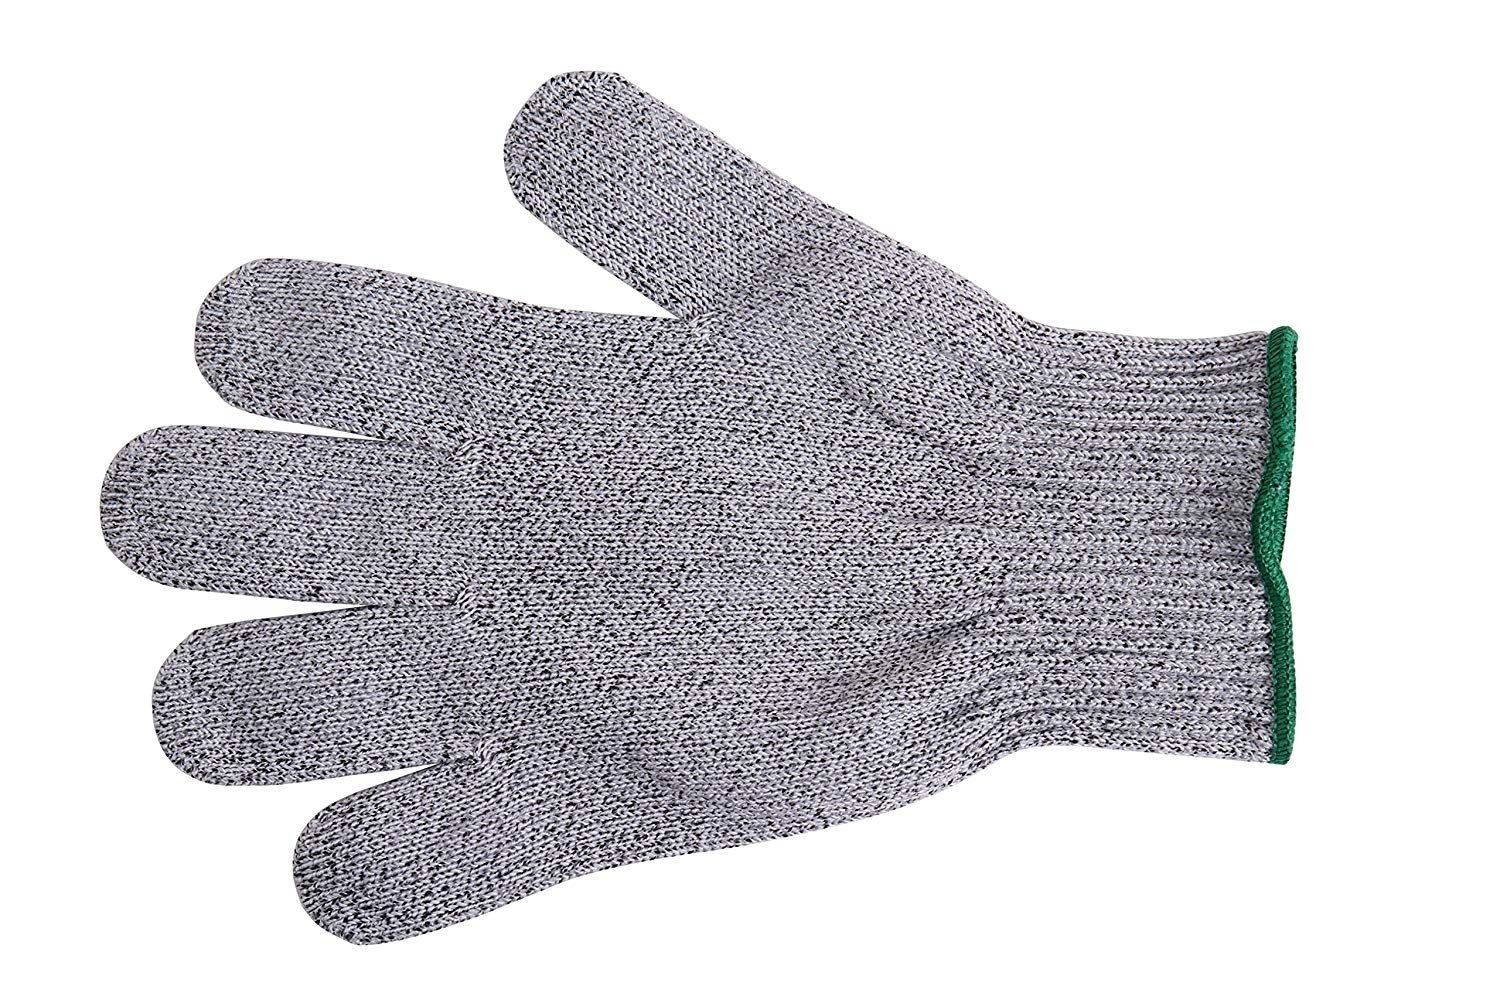 These Kitchen Gloves Are Cut Resistant